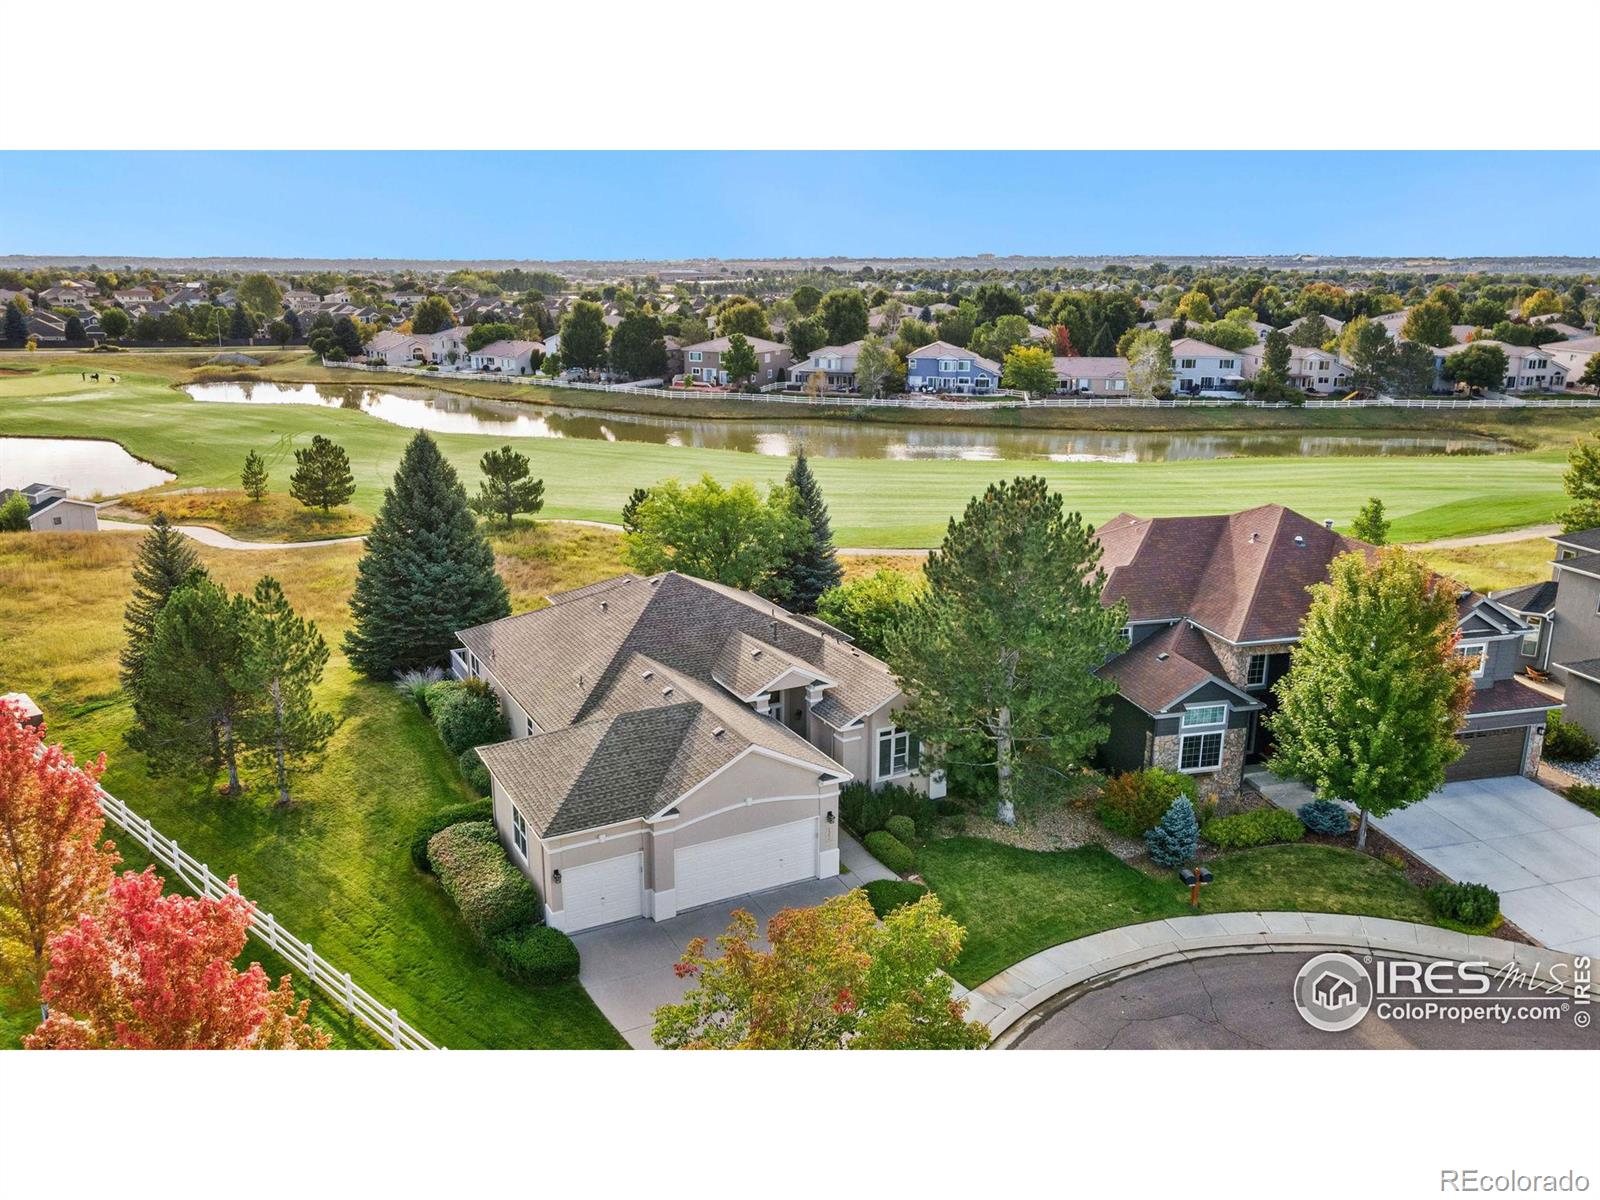 14090  Turnberry Court, broomfield MLS: 456789997075 Beds: 3 Baths: 3 Price: $1,050,000